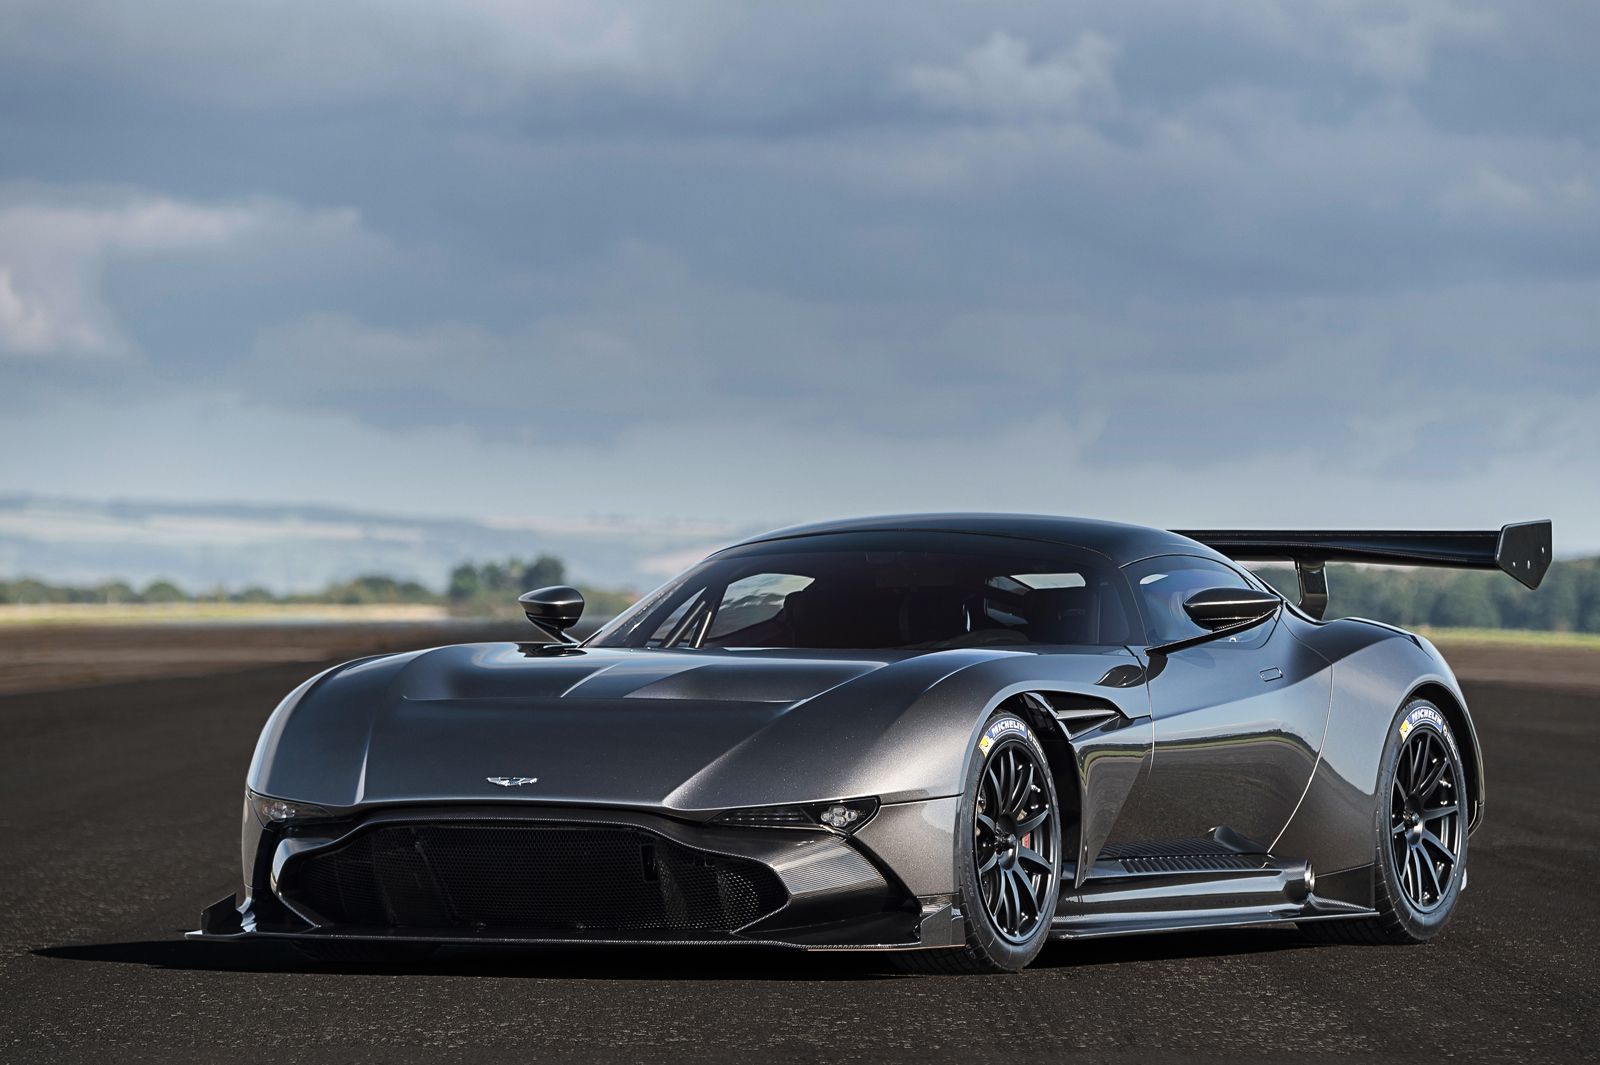 castrol nexcel gives you a 90 second engine oil change debuts on aston martin vulcan image 11